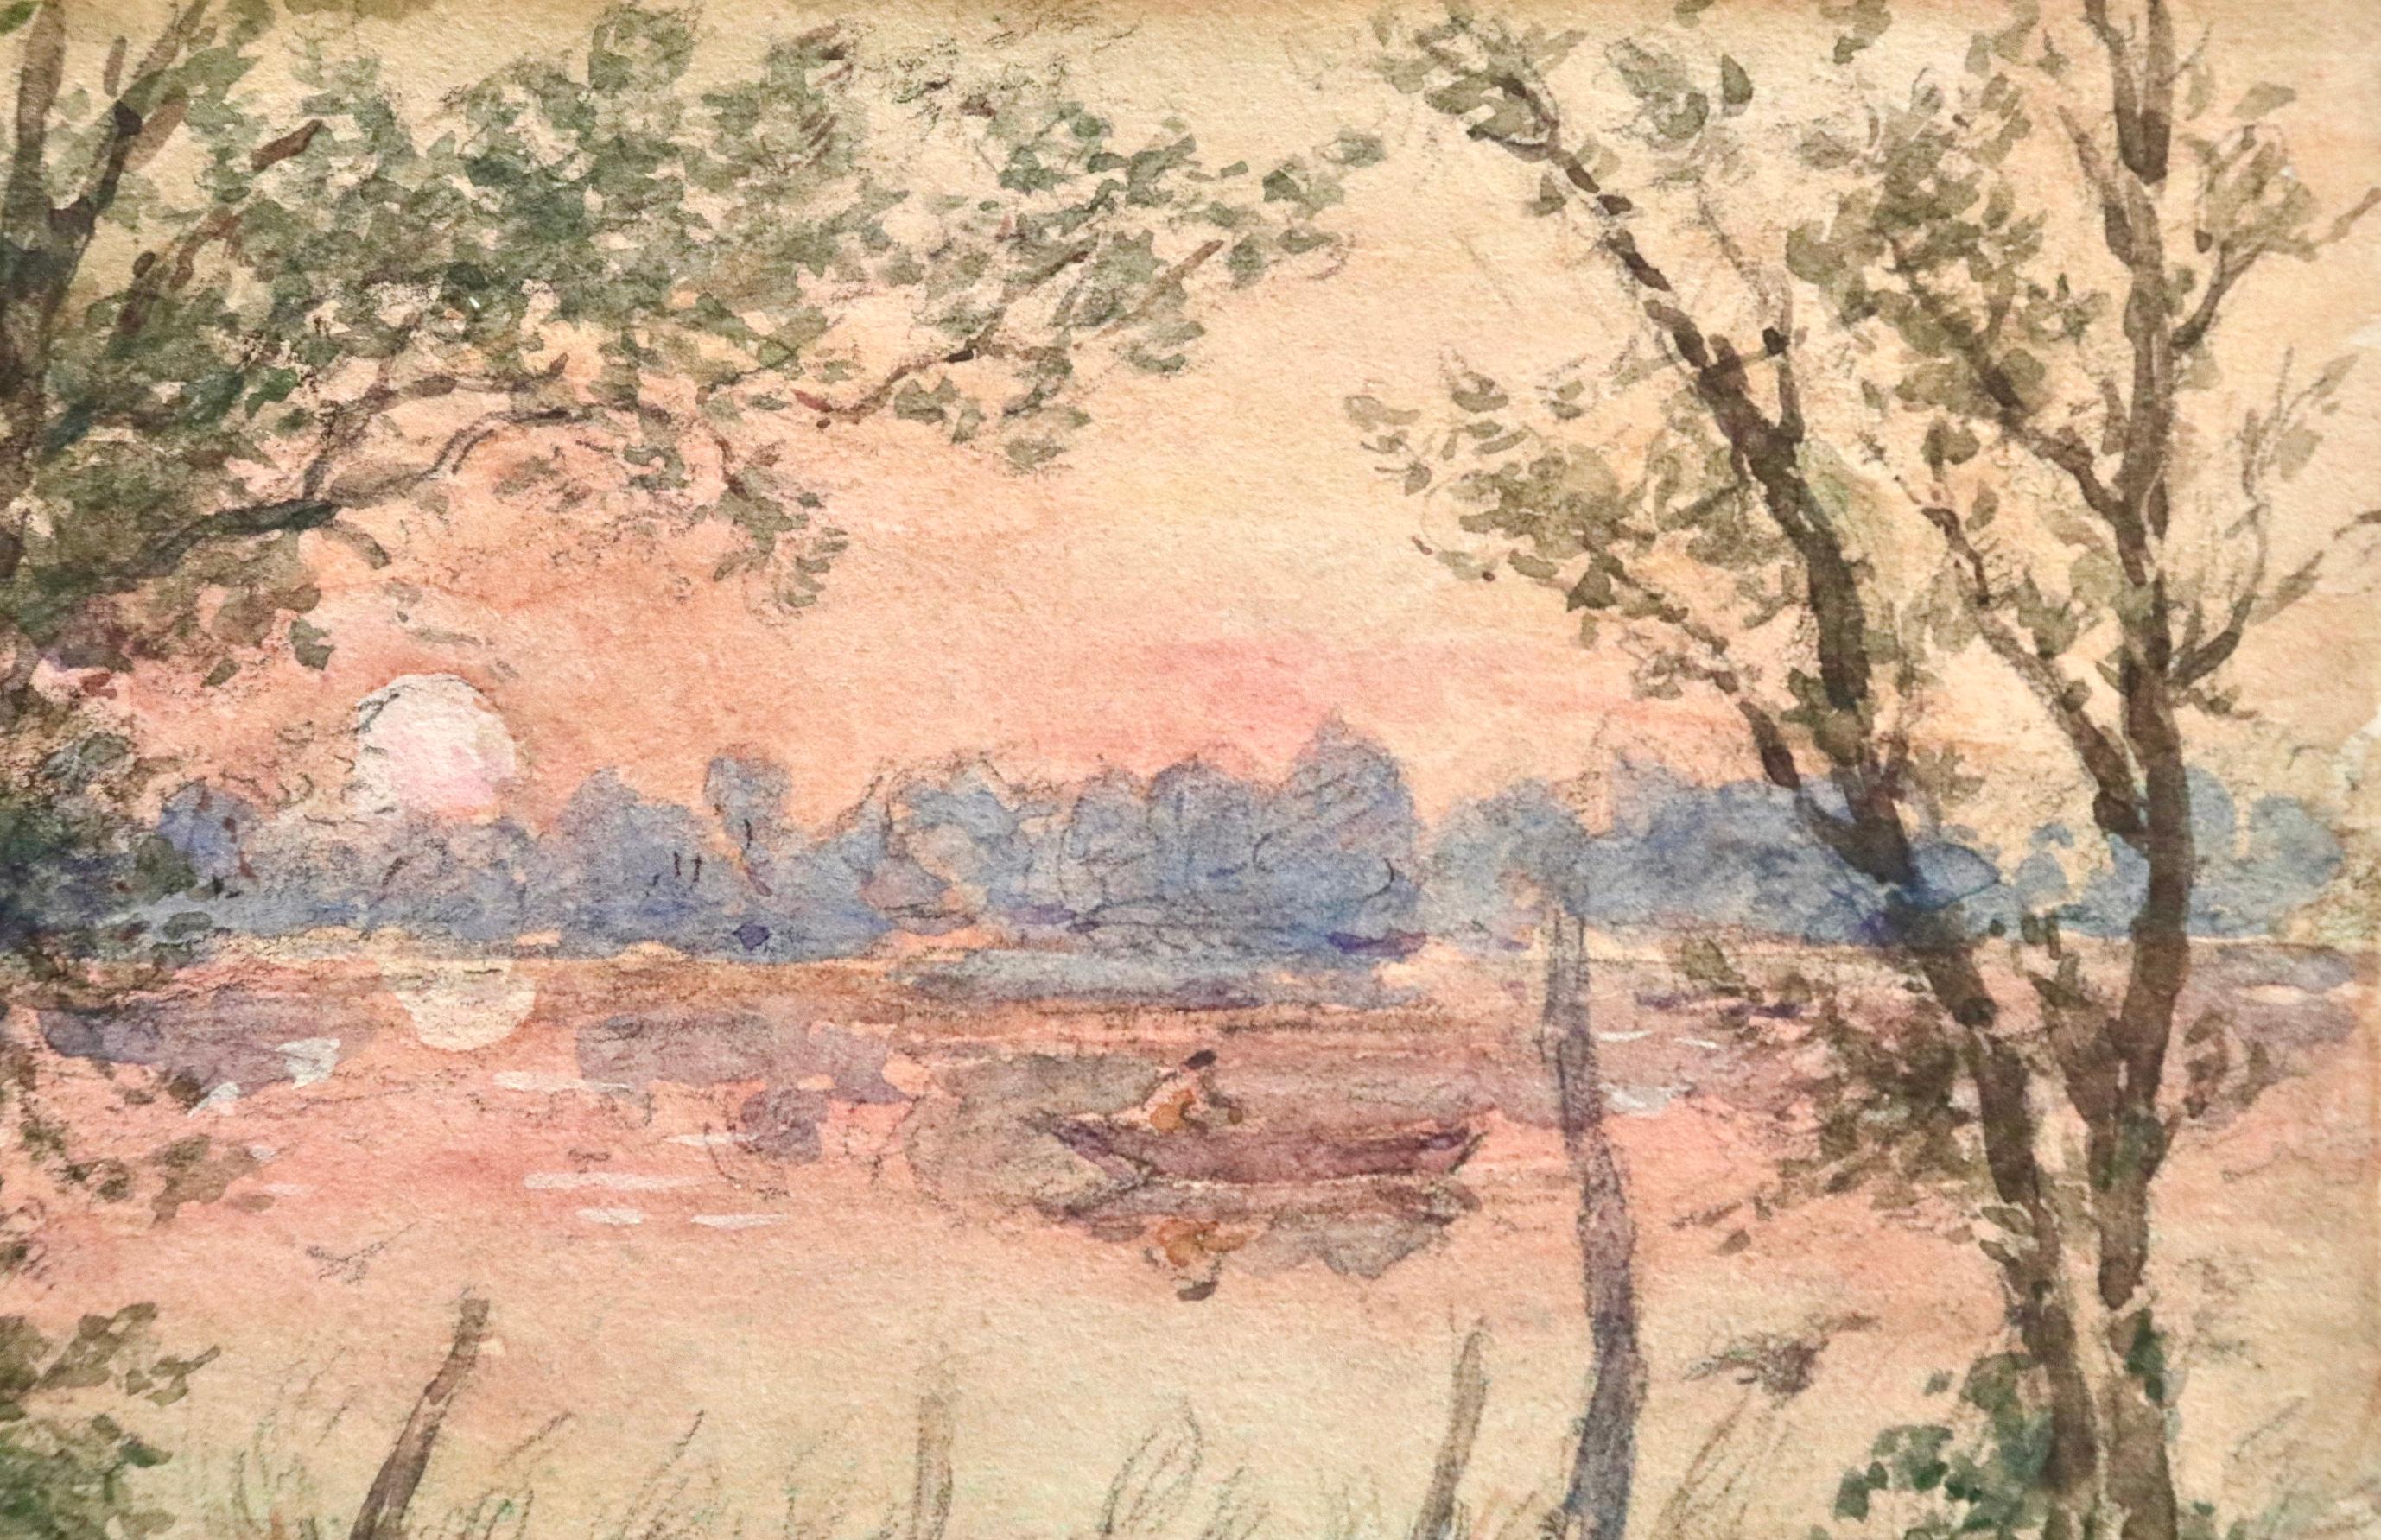 Rowing at Sunset - Impressionist Watercolor, Boat on River Landscape by H Duhem 2